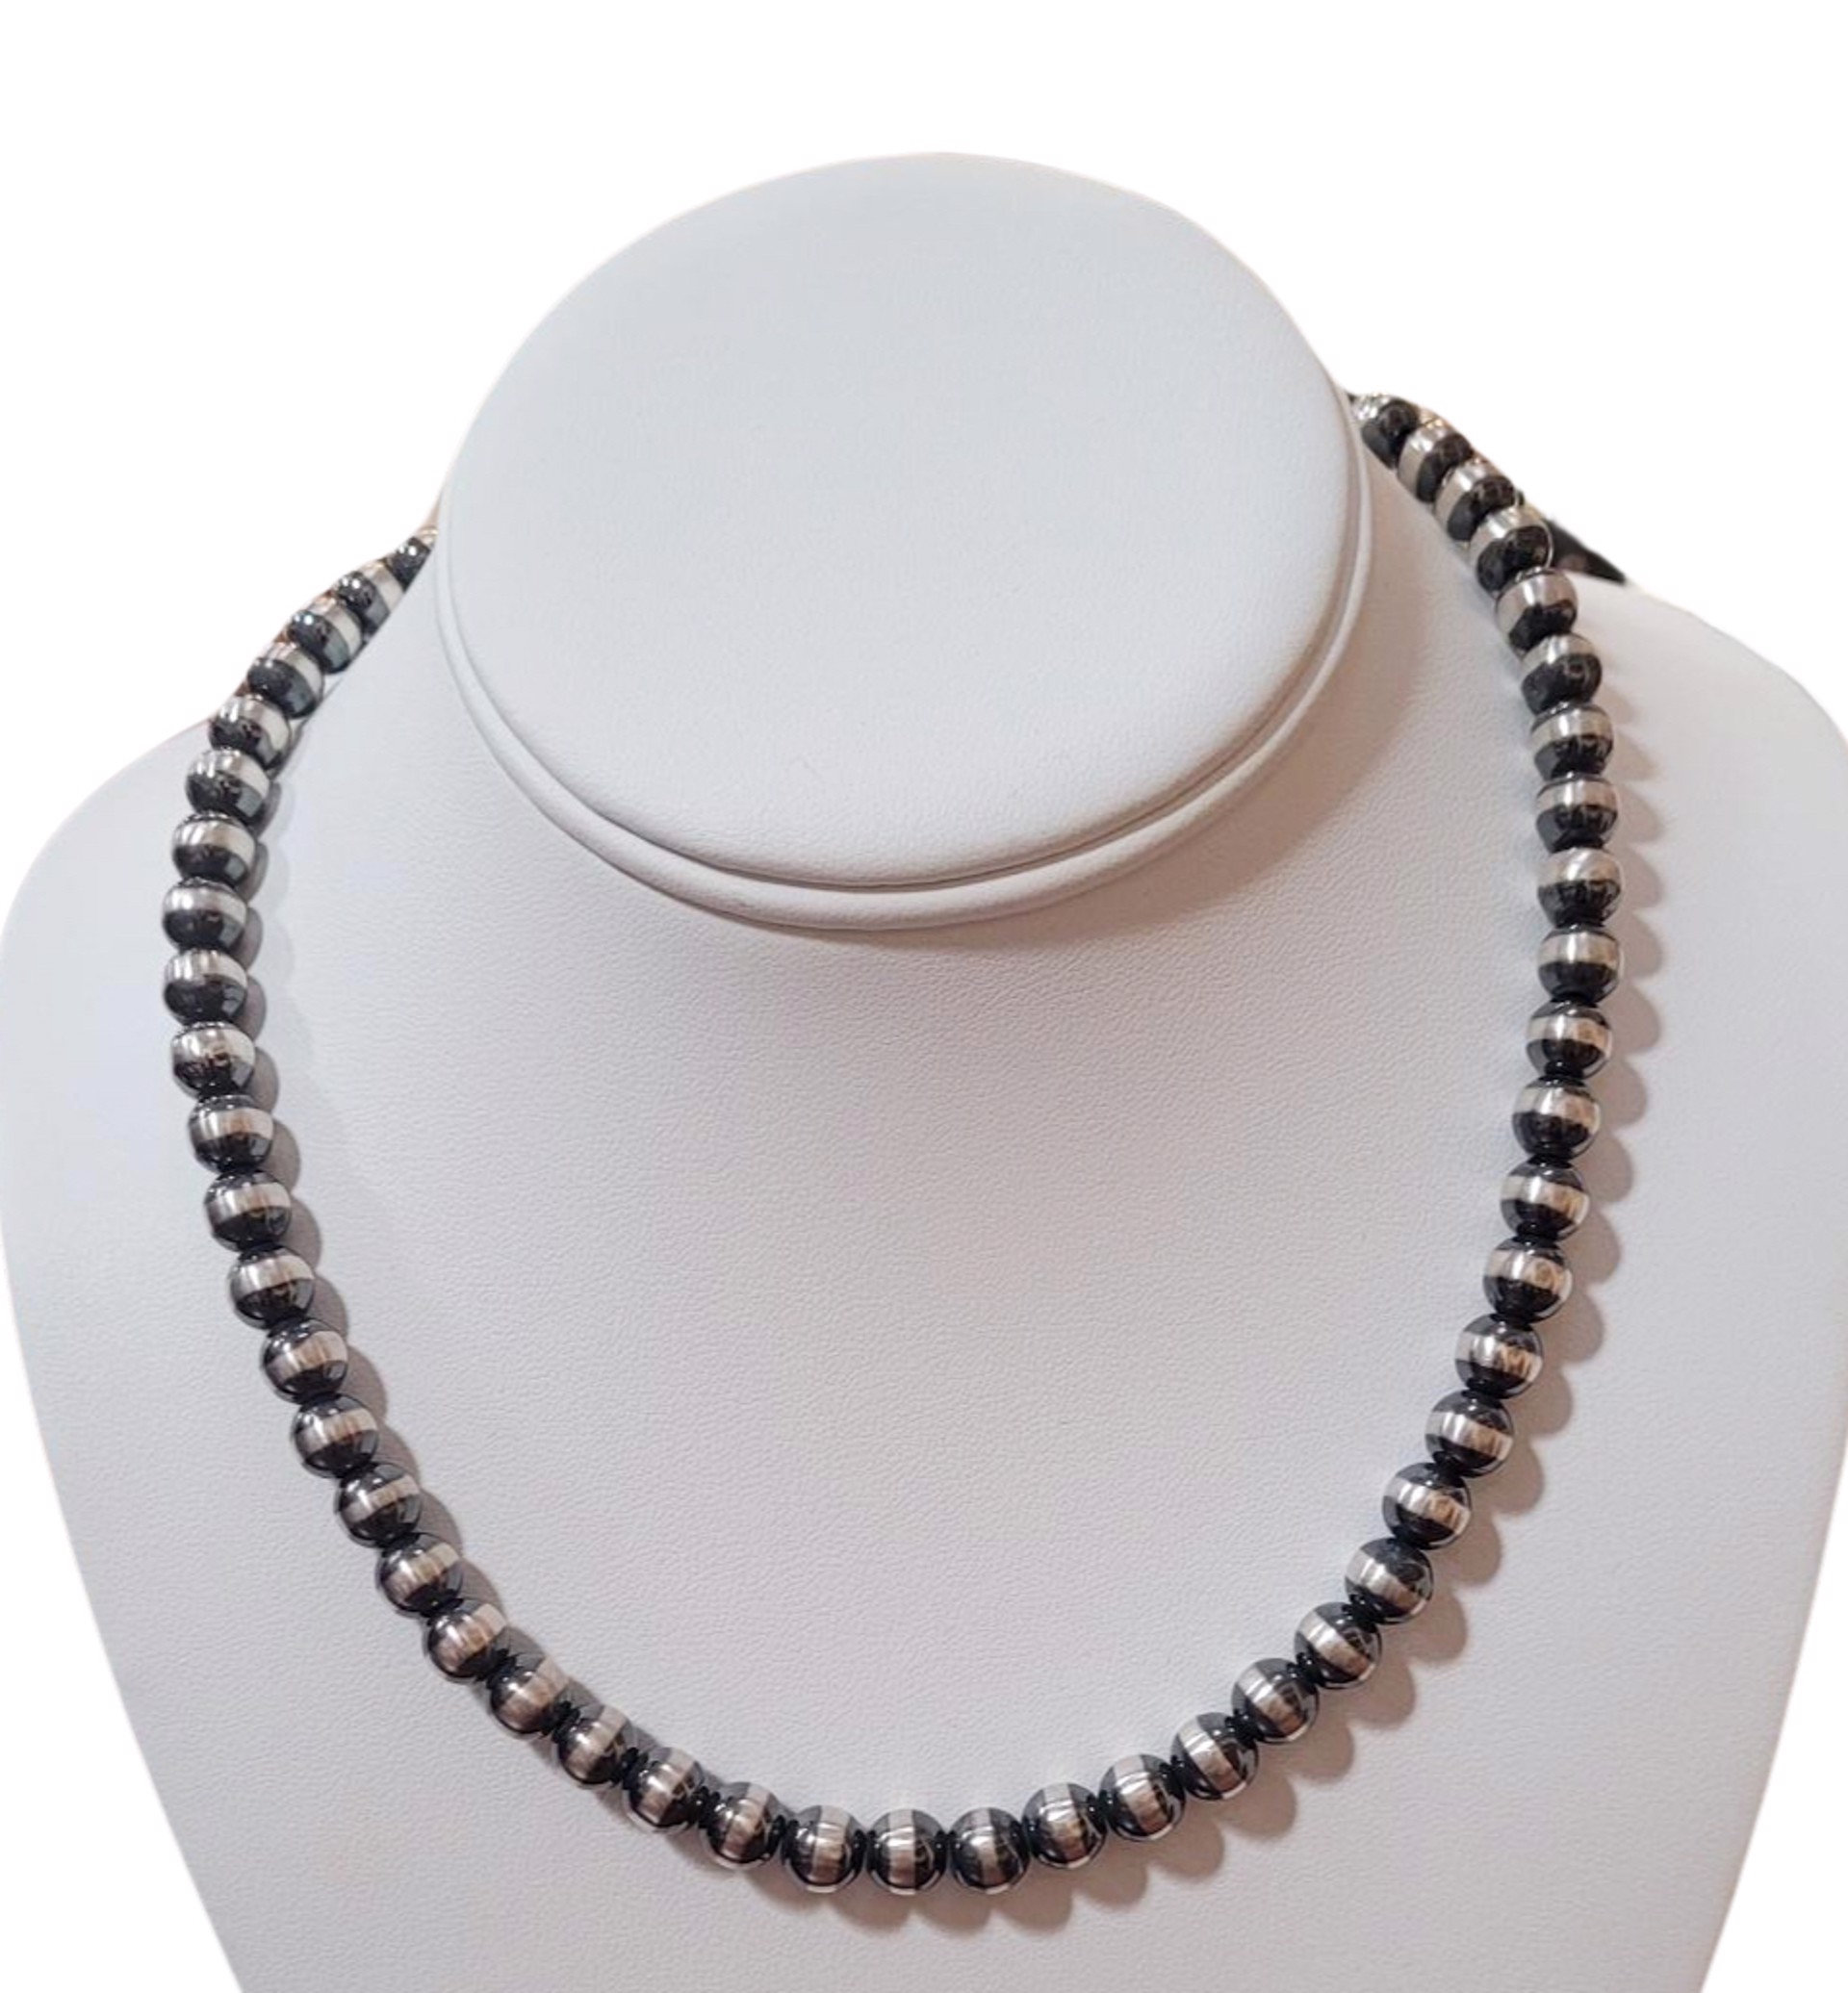 Necklace -  18" Sterling Silver Pearls 8mm by Indigo Desert Ranch - Jewelry